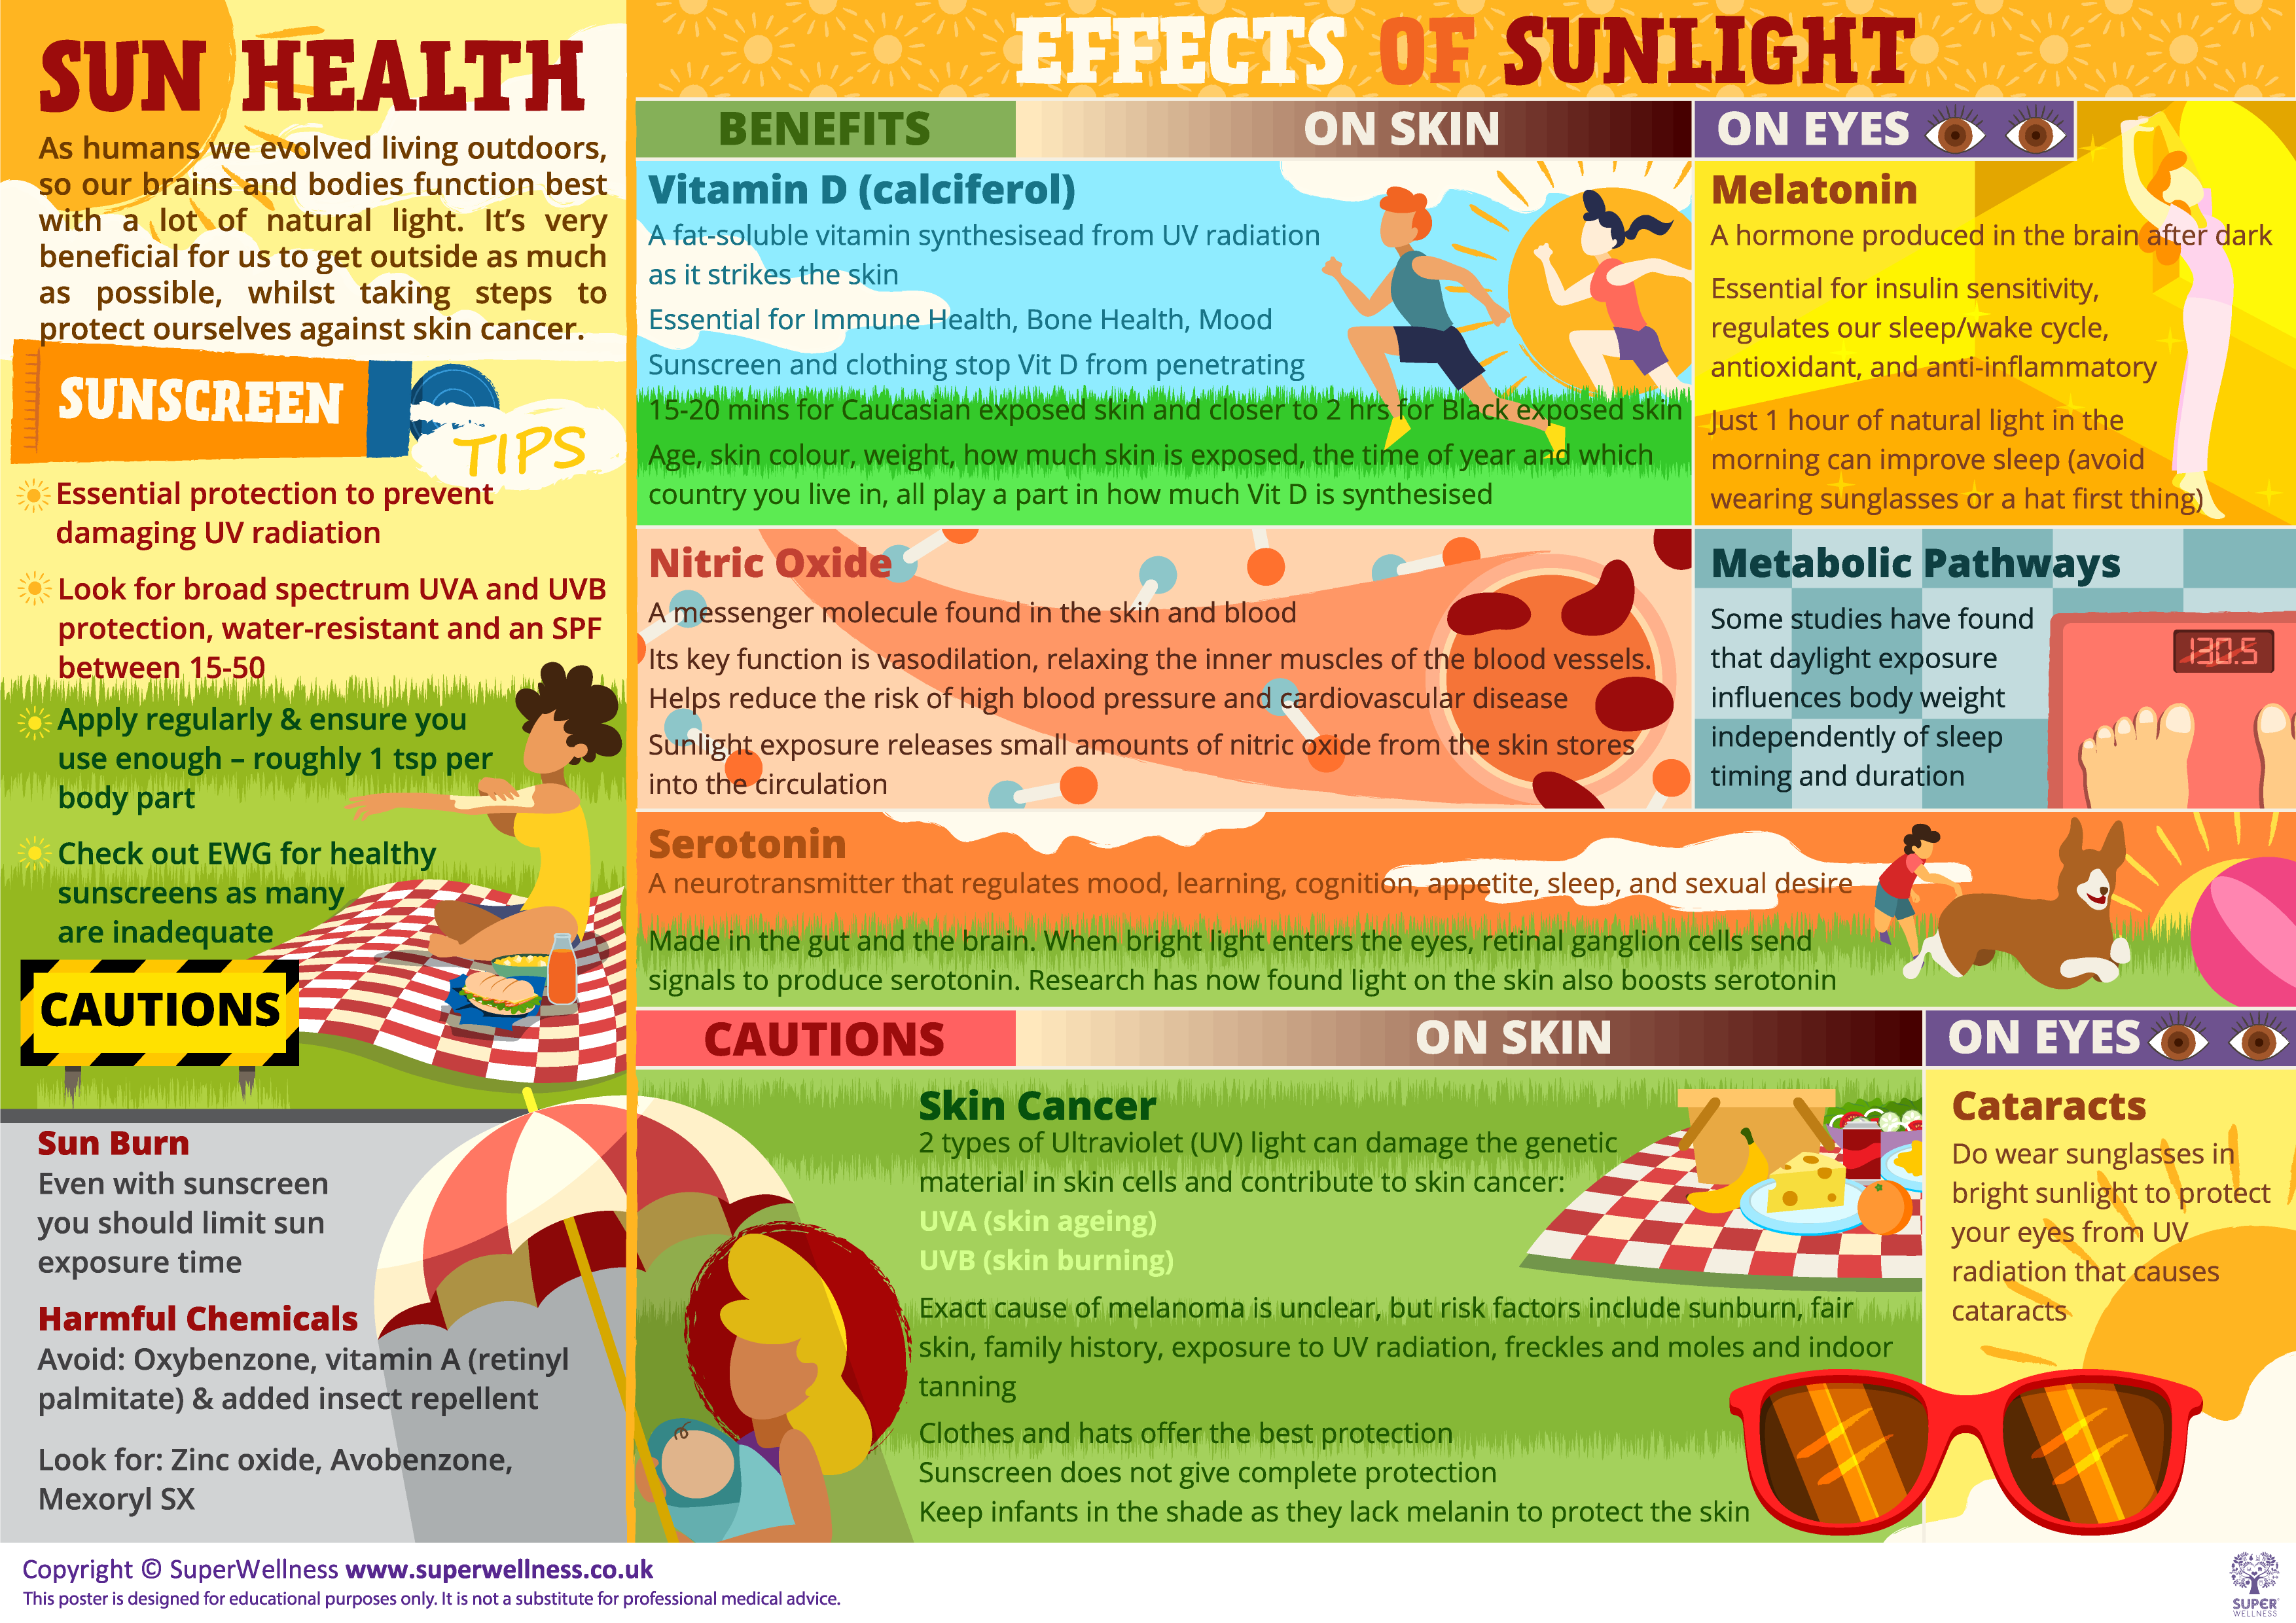 Top tips for sun health and summer wellbeing poster